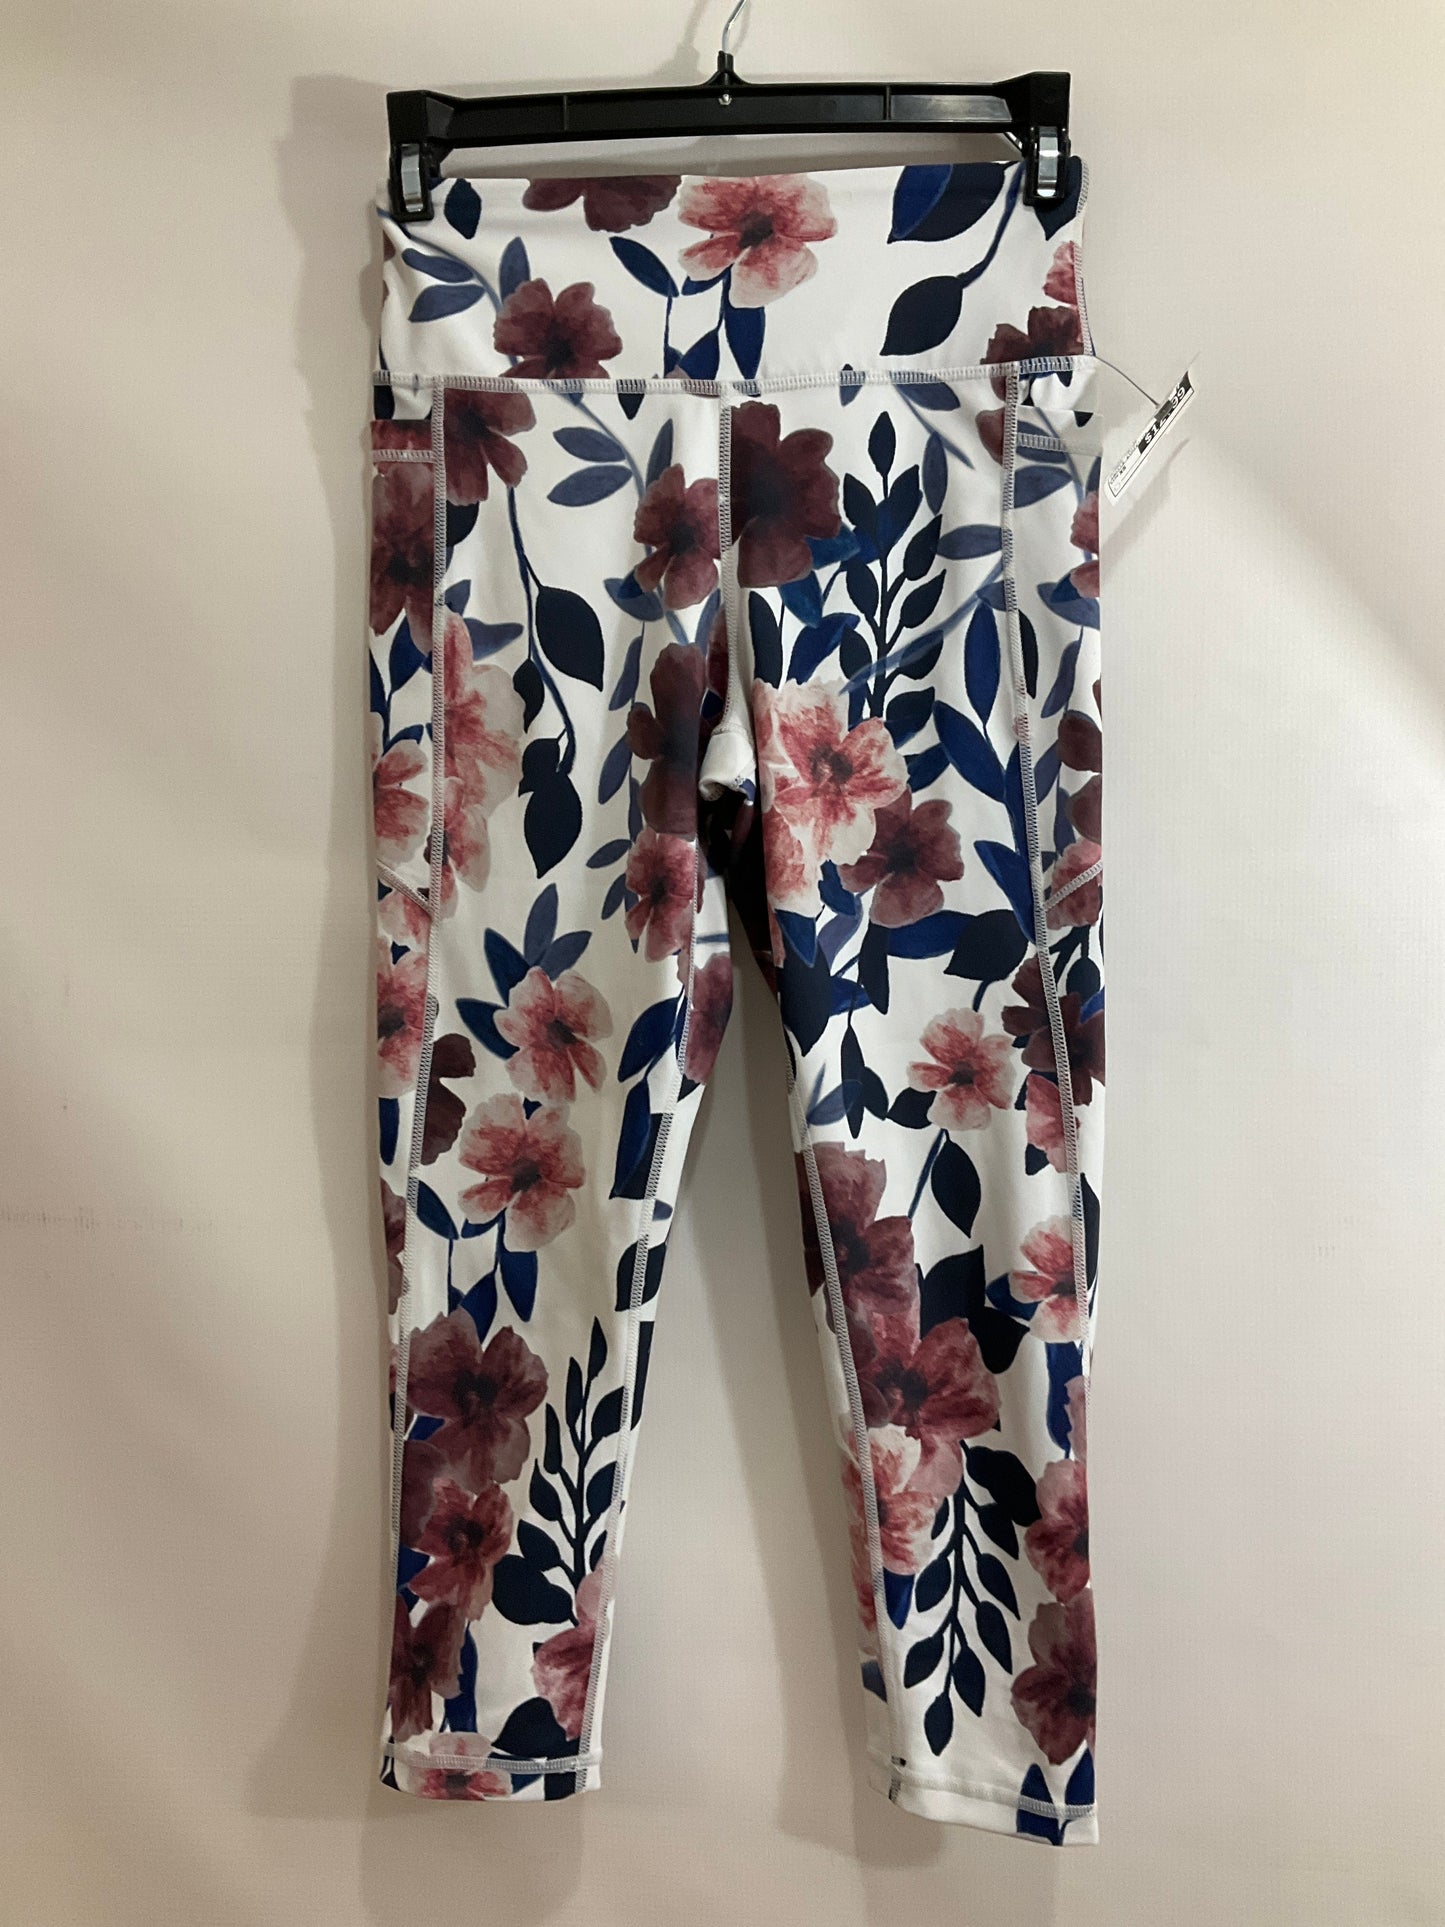 Floral Print Athletic Leggings Clothes Mentor, Size Xs